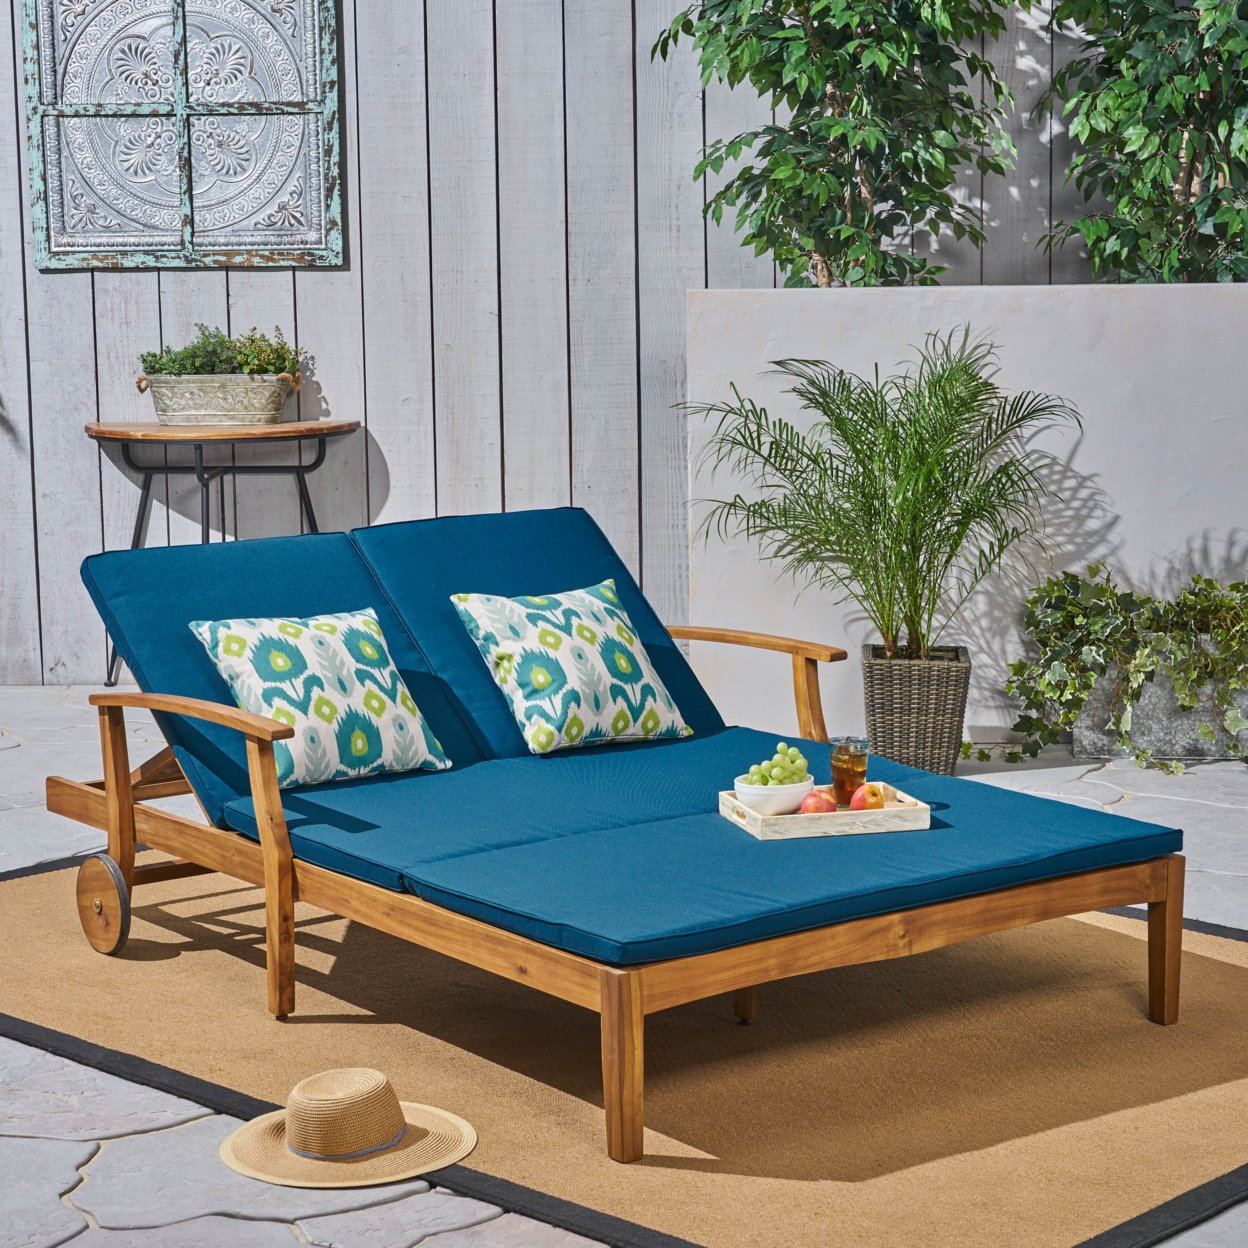 Samantha Double Chaise Lounge For Yard And Patio, Acacia Wood Frame - Cream